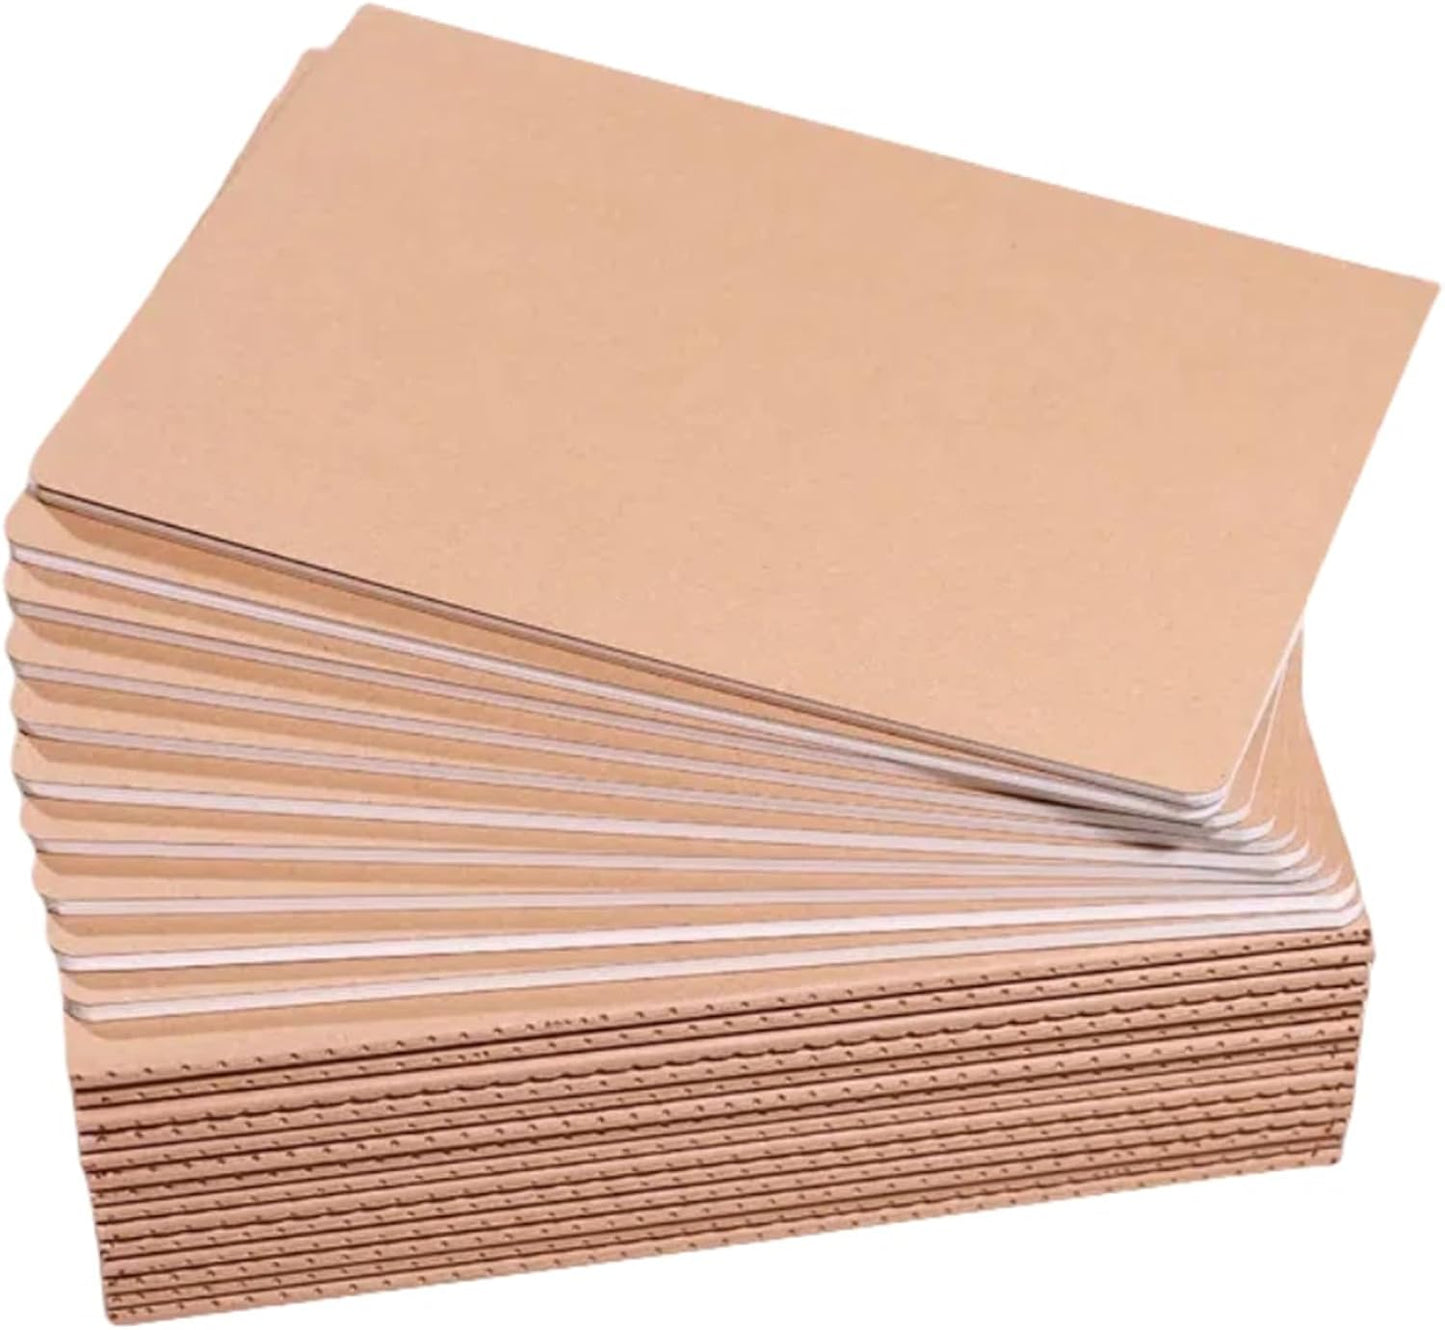 16 Pack Kraft Notebooks, Journals in Bulk for Writing, Blank Paper Sketchbooks, 60 Pages Composition Notebook, 8.3X5.5 Inch, A5 Size, Travel Journal Set, for Gifts, Students and Office Supplies